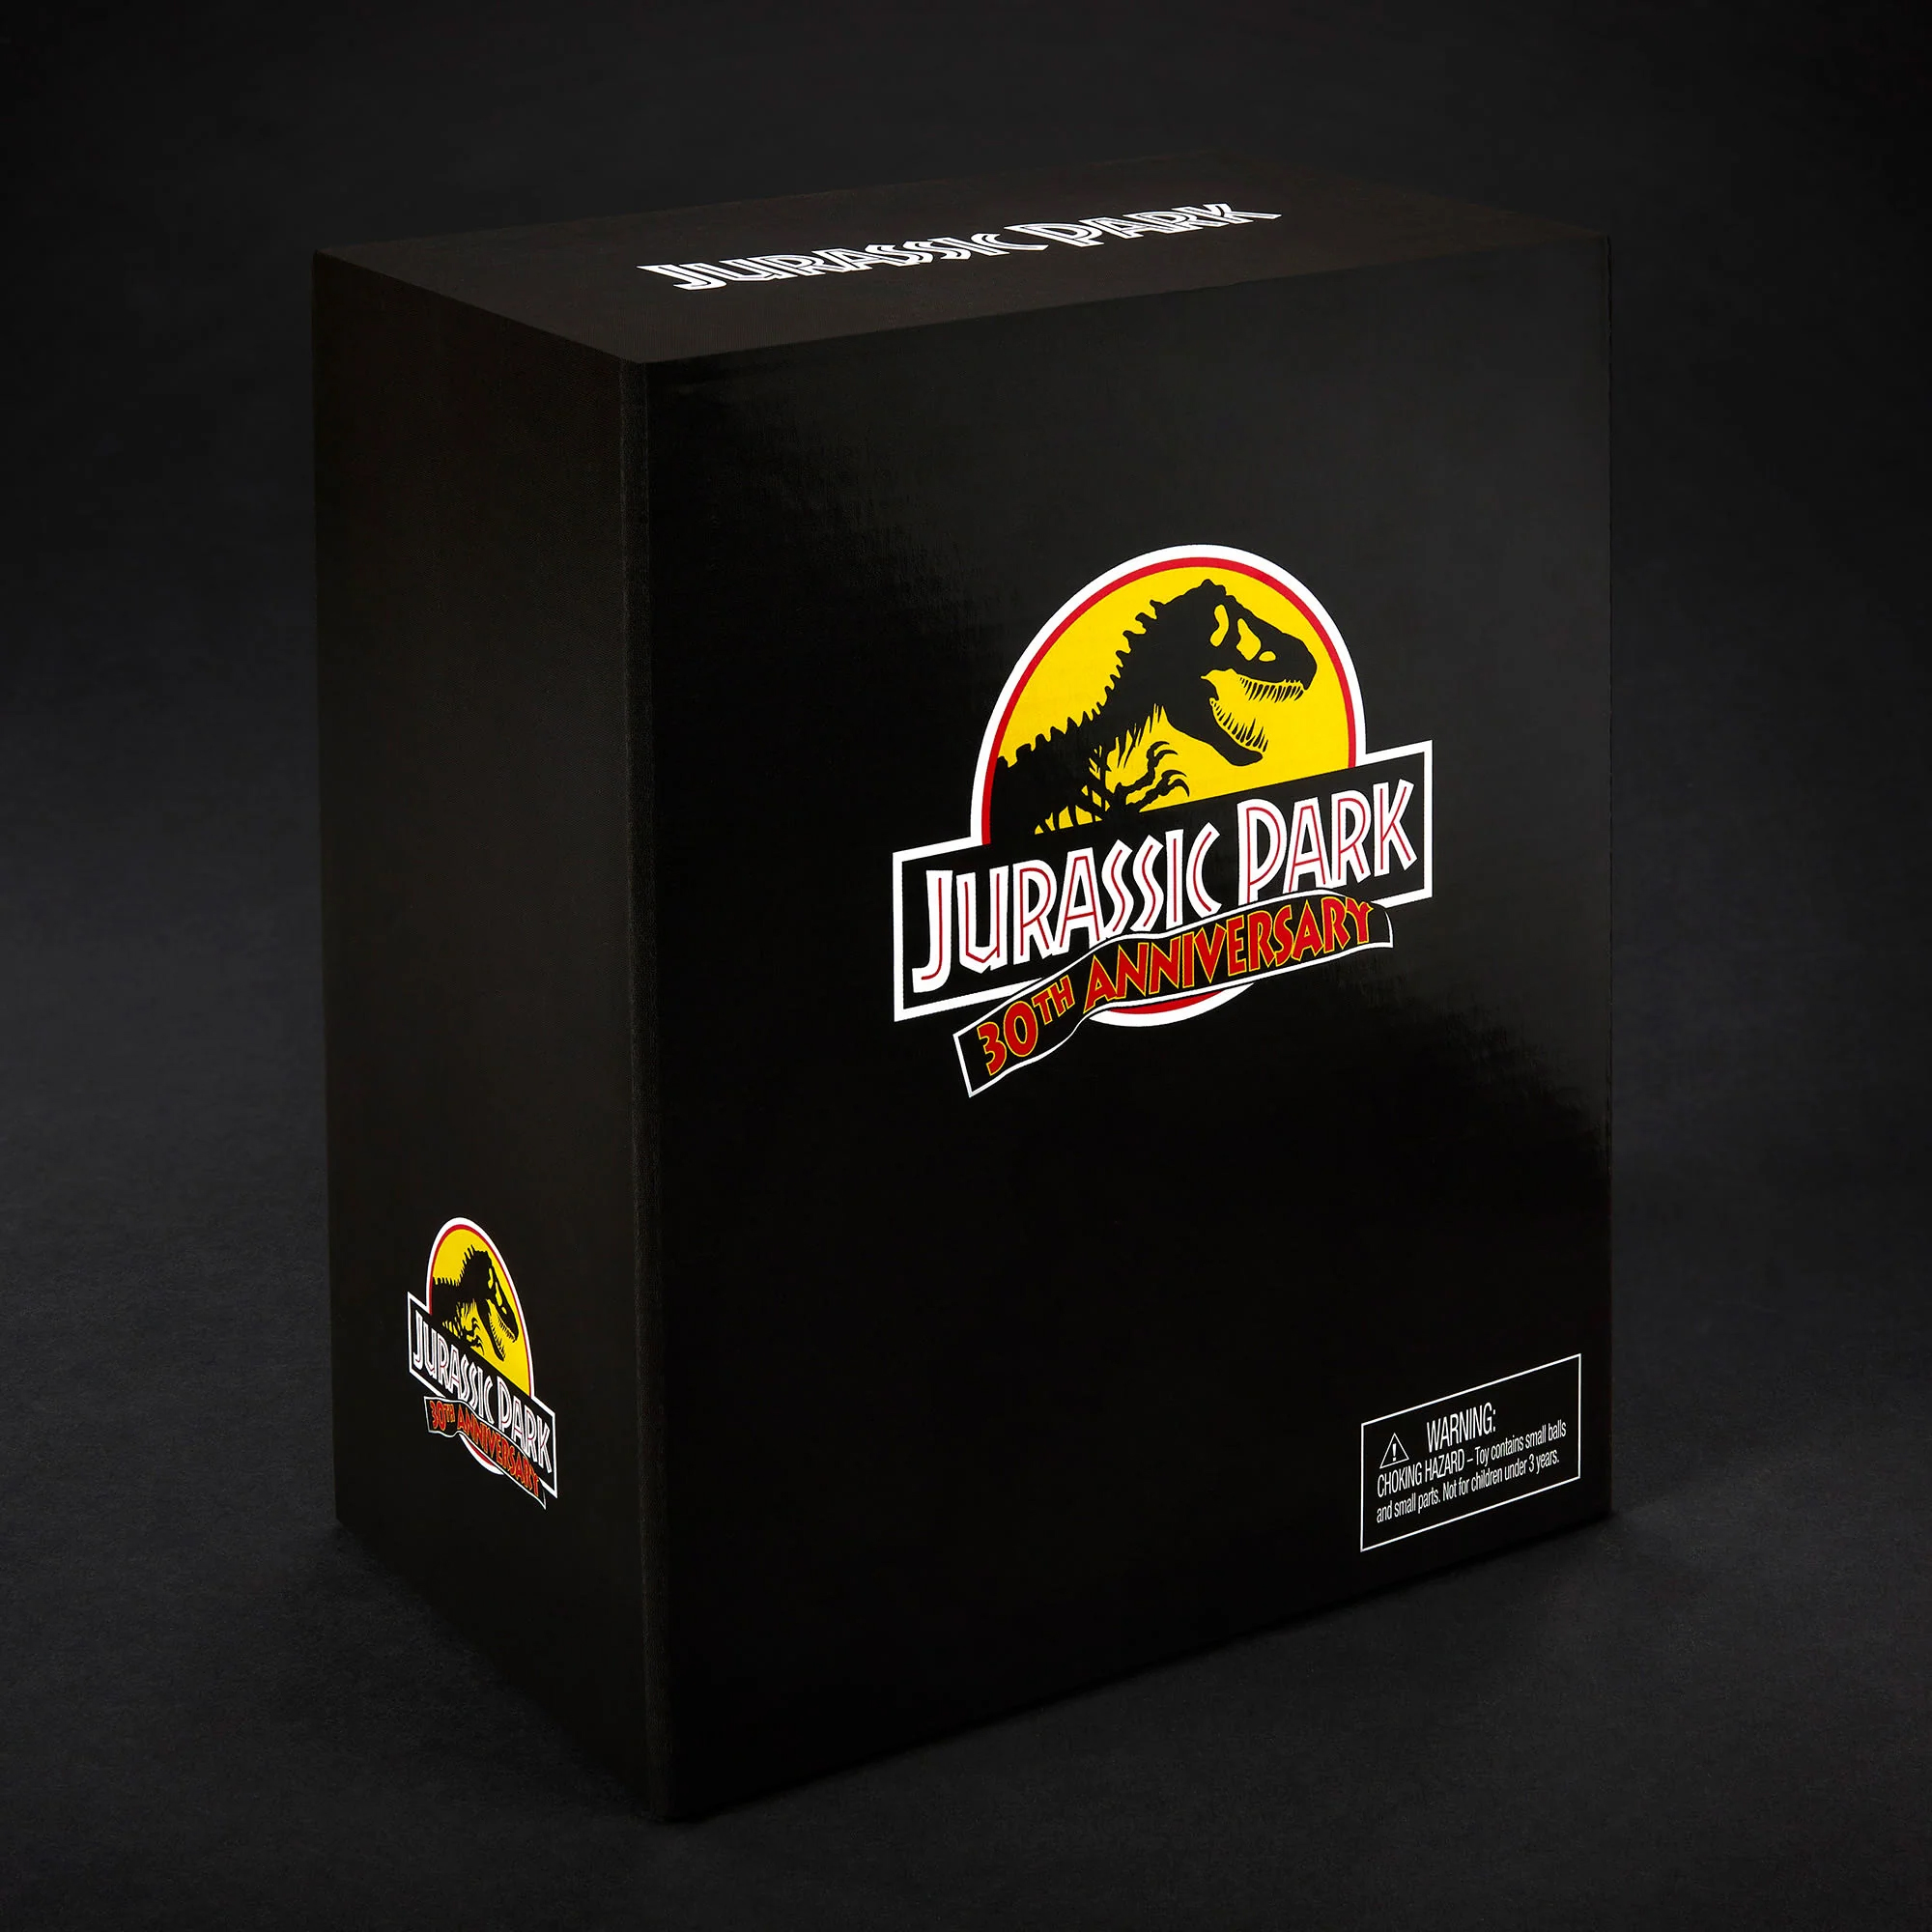 Collect Jurassic on X: WELCOME… TO MY SHOWER! This special delivery from @ drsquatch provided quite an unboxing experience — a real wooden crate  containing a pair of eggs nested inside. And what